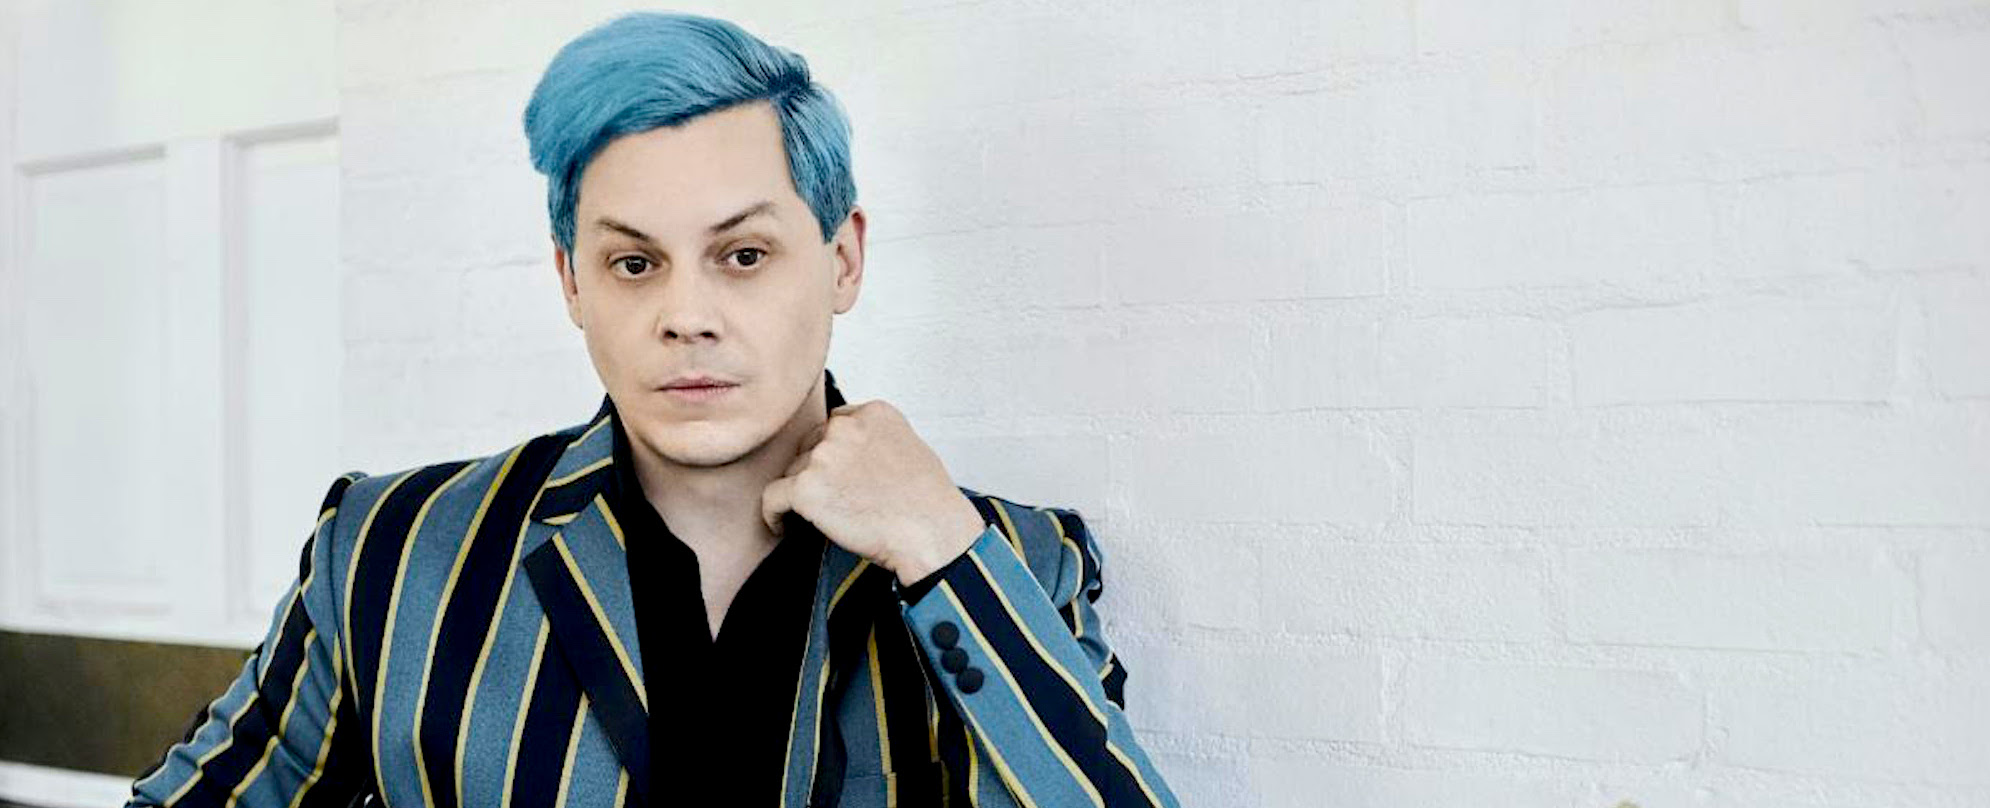 Jack White Set to Release Two Albums in 2022, Shares Video for “Taking Me Back”